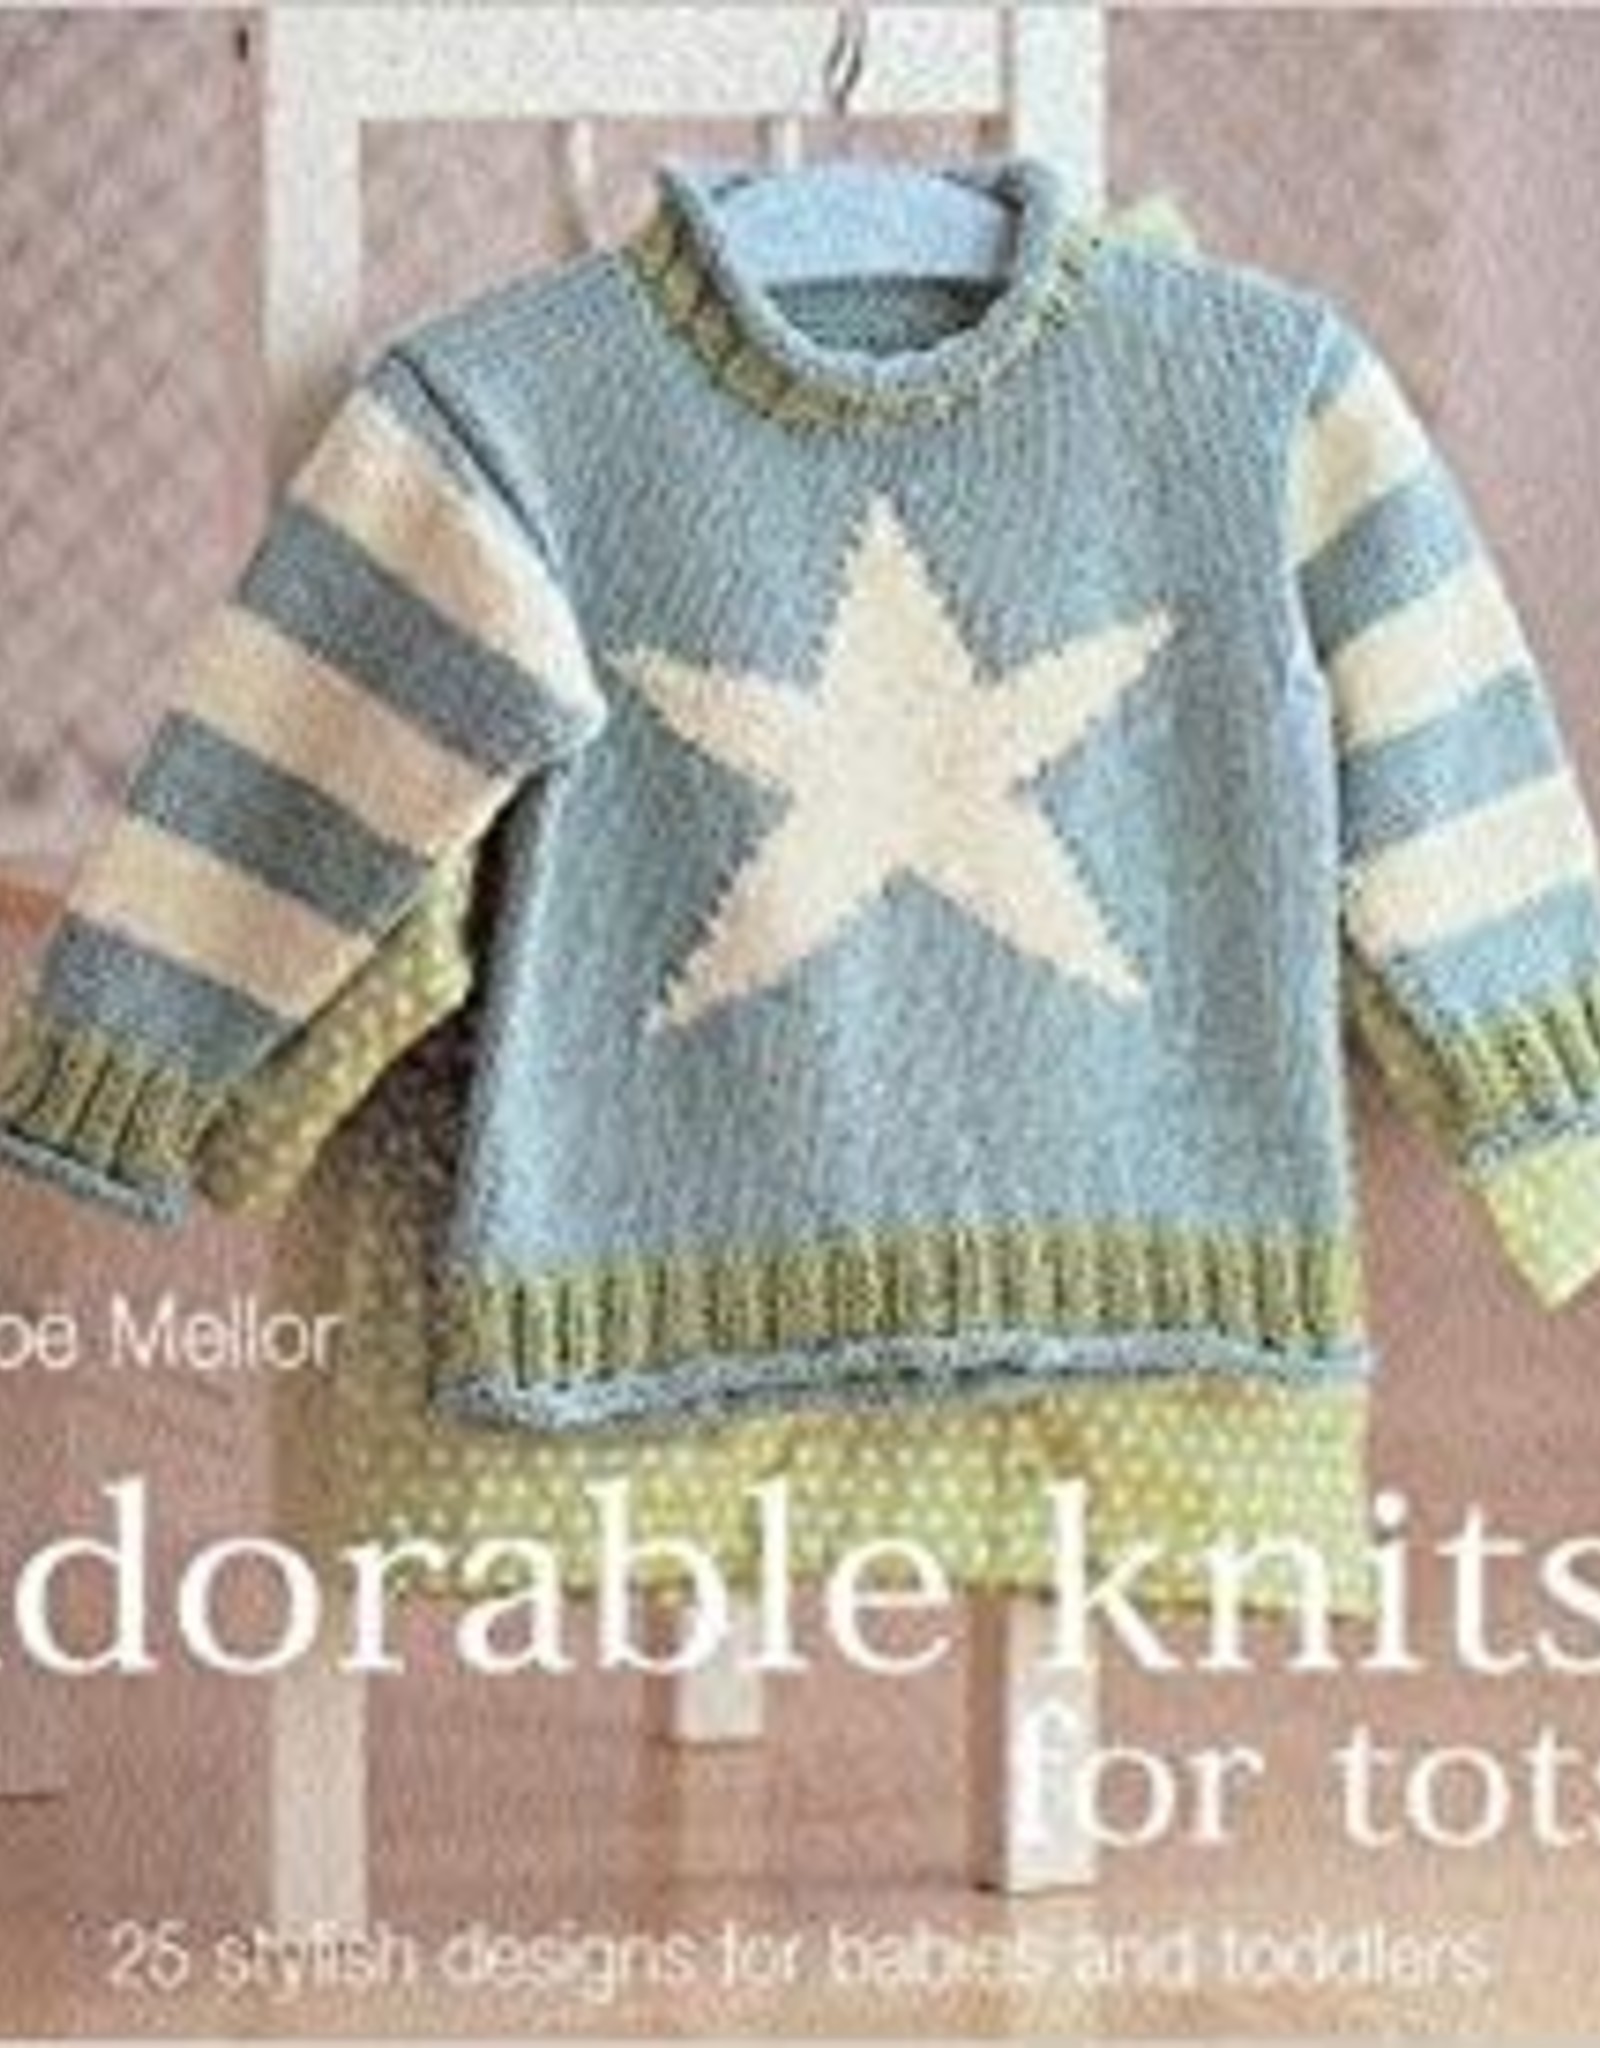 Adorable Knits for Tots by Zoe Mellor